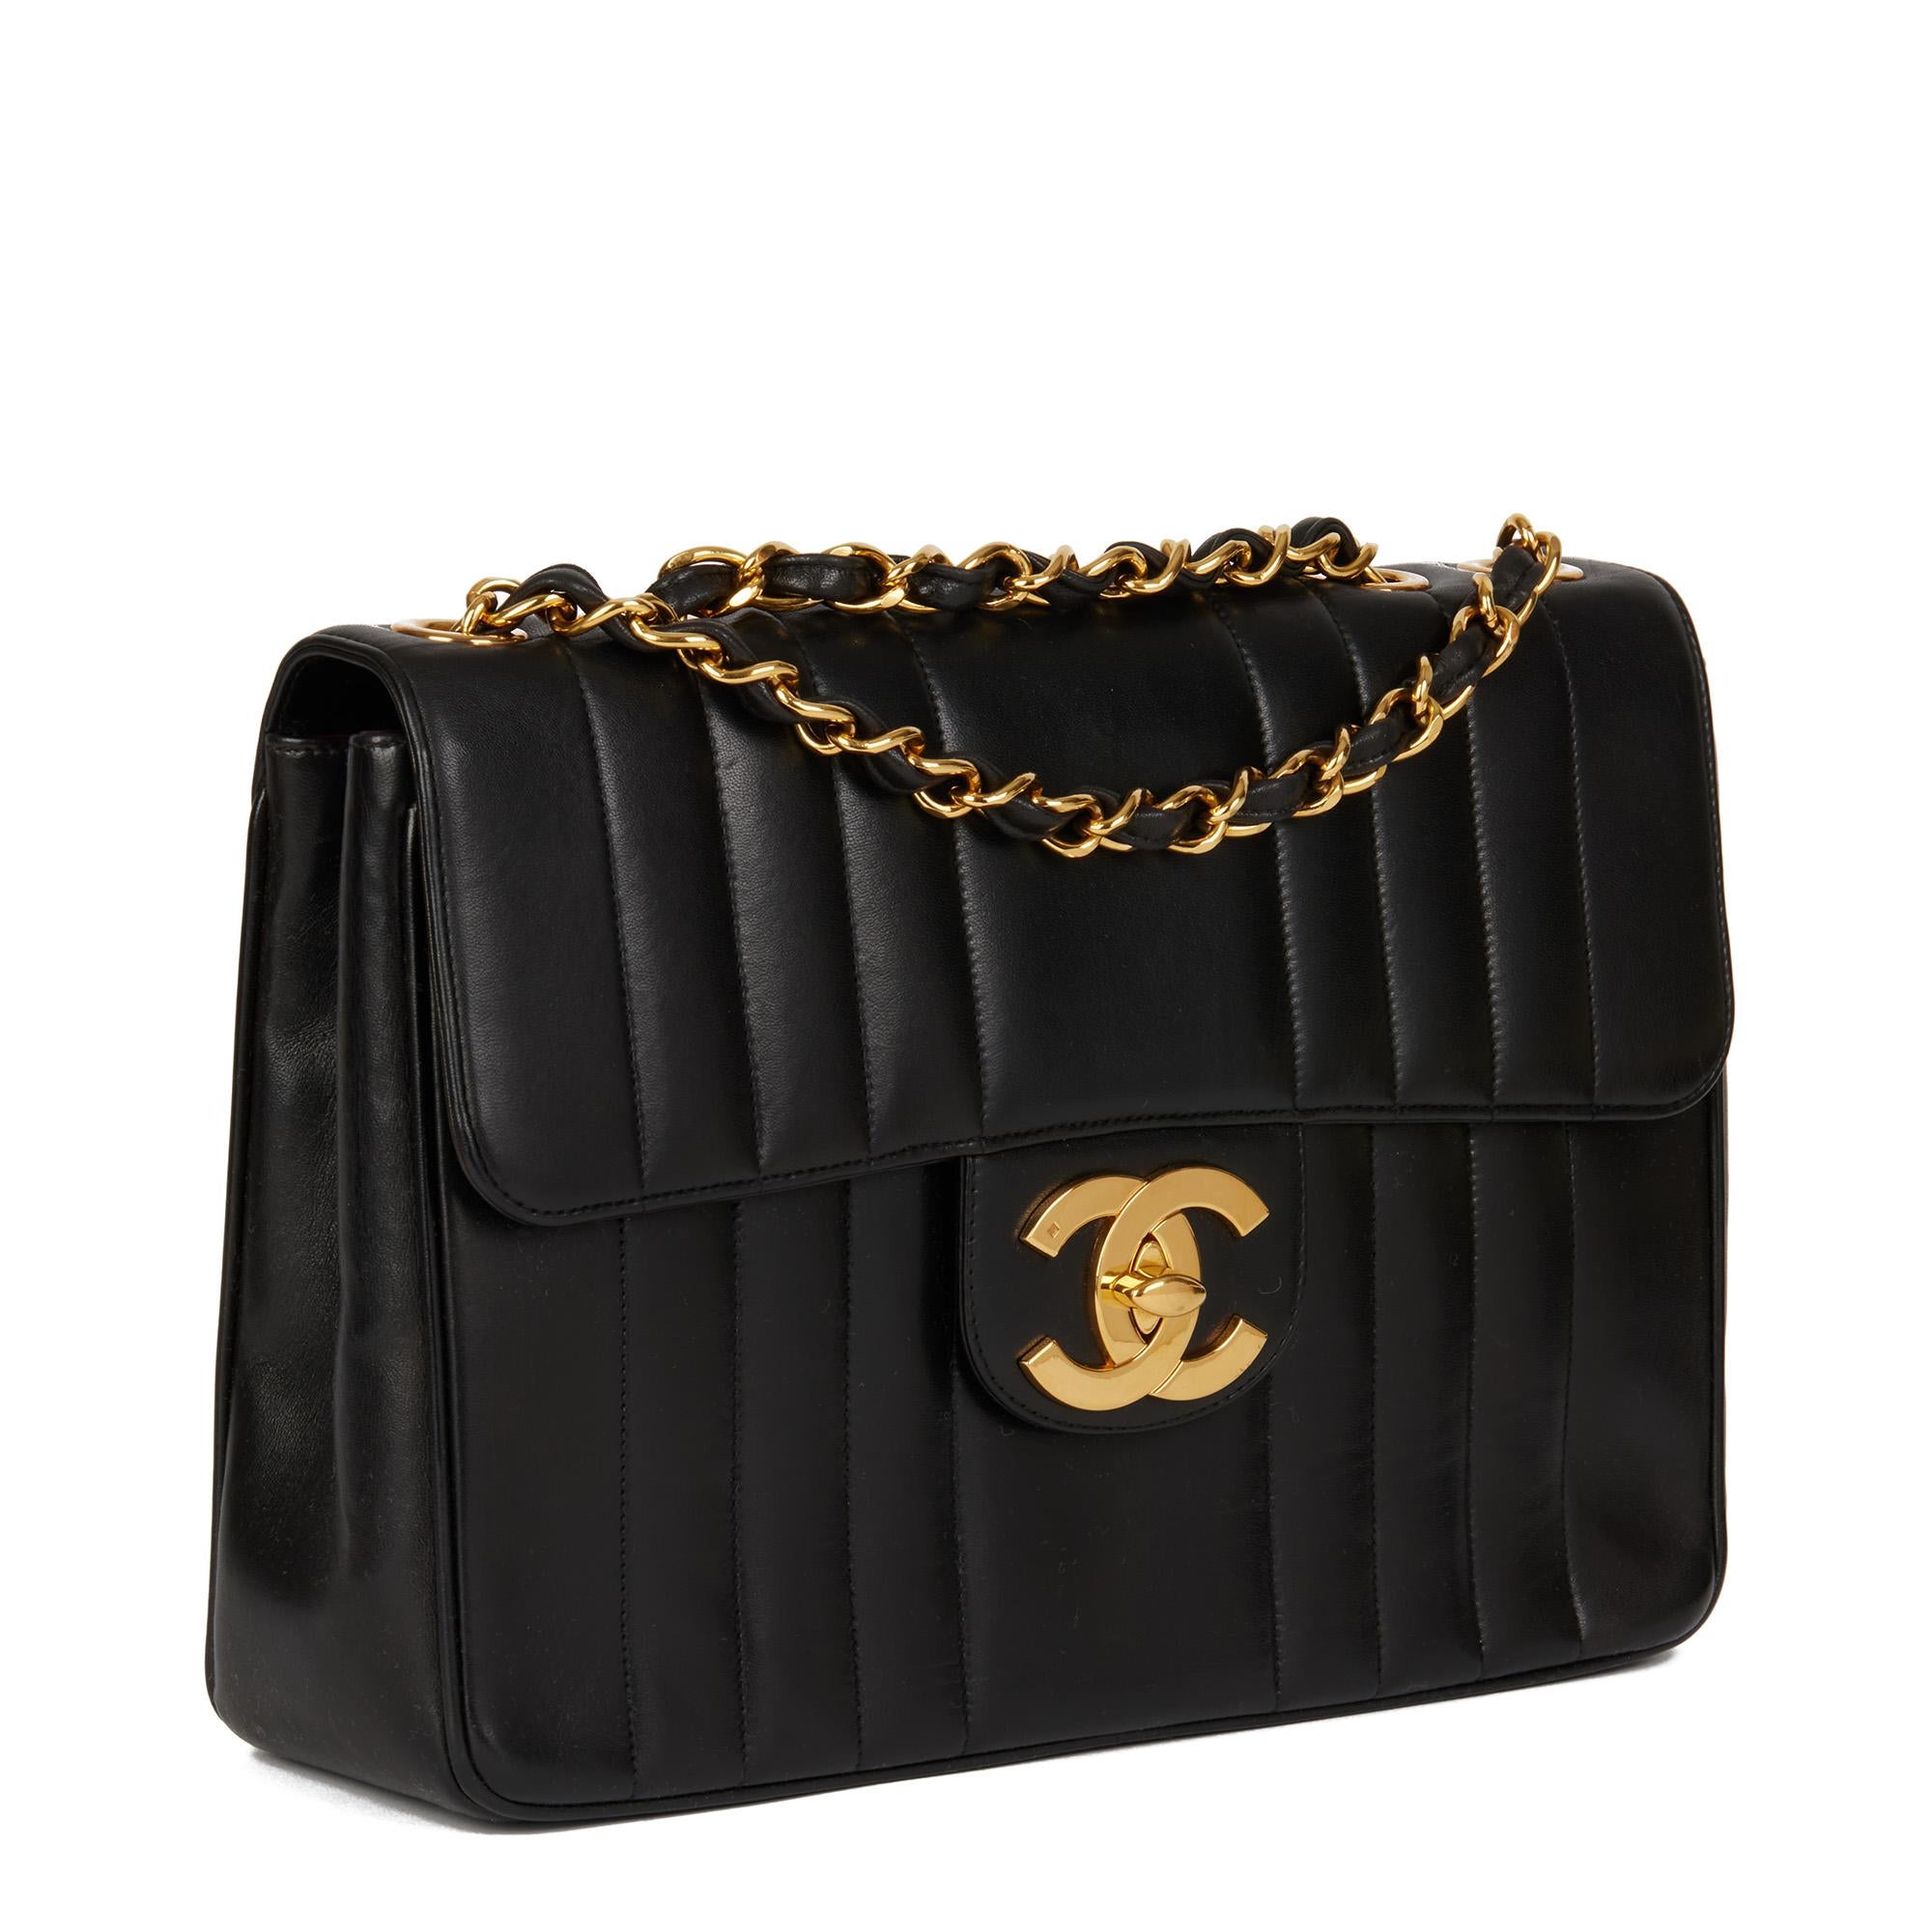 CHANEL
Black Vertical Quilted Lambskin Vintage Jumbo XL Classic Single Flap Bag

Xupes Reference: HB4521
Serial Number: 3539698
Age (Circa): 1996
Accompanied By: Chanel Dust Bag, Box
Authenticity Details: Authenticity Card, Serial Sticker (Made in